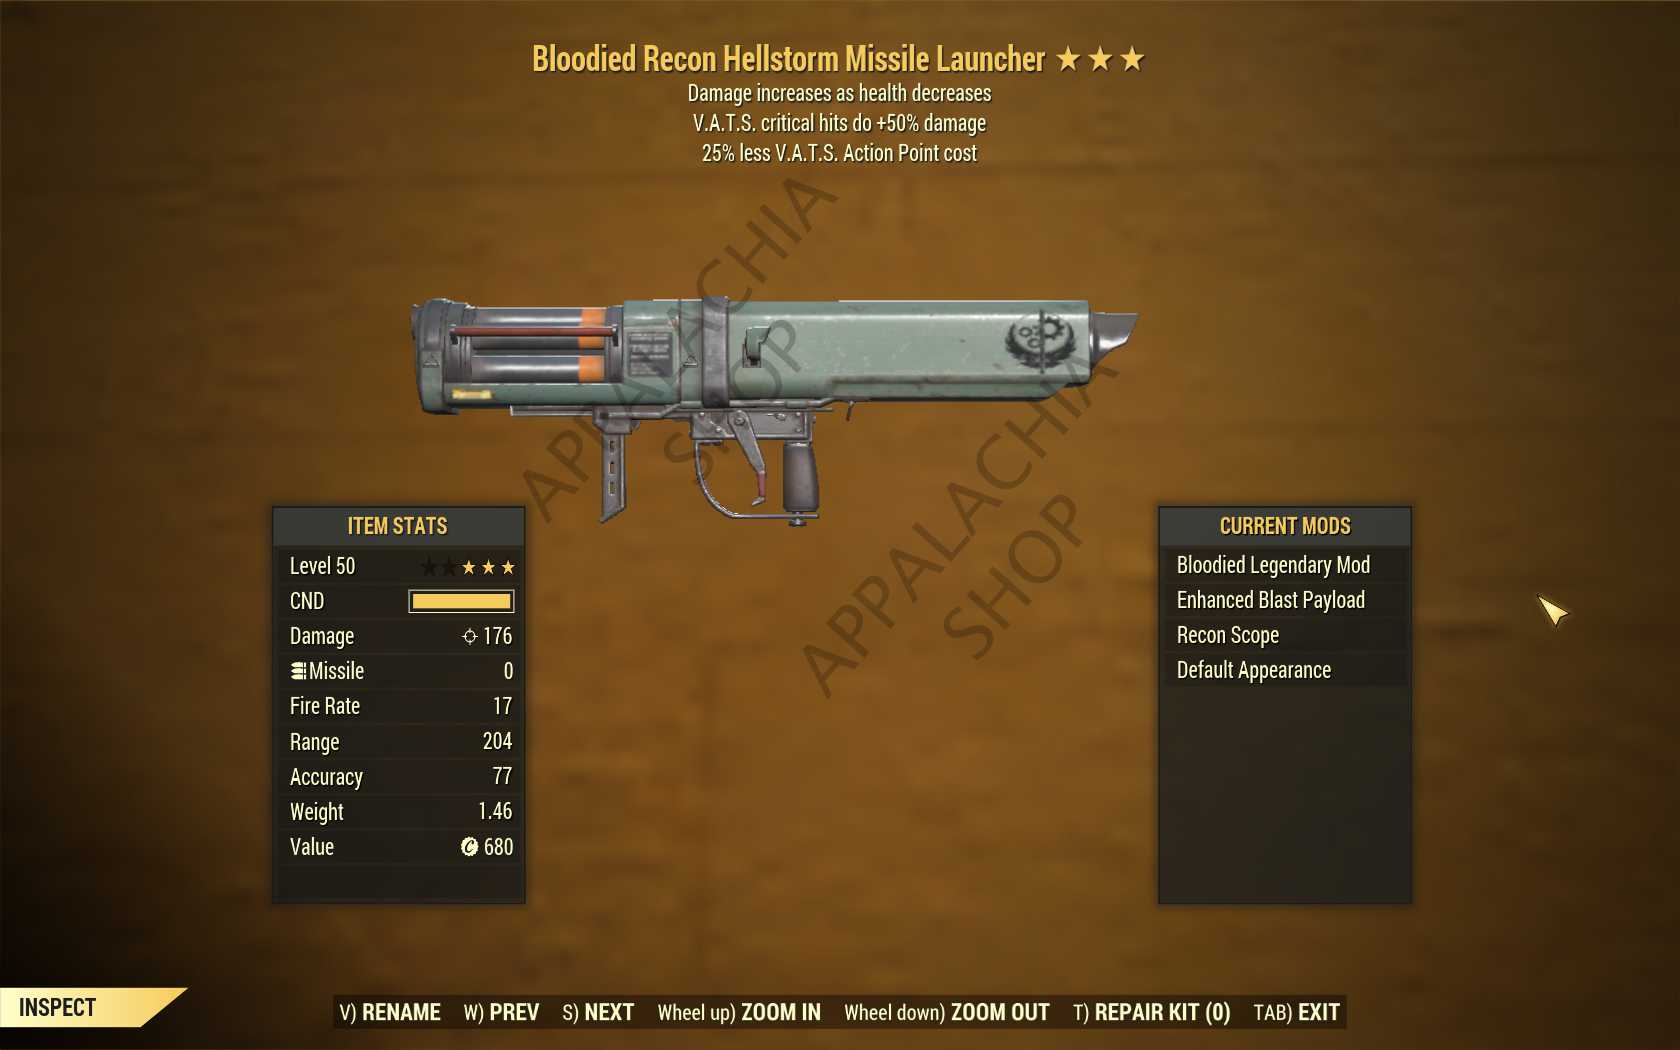 Bloodied Hellstorm Missile Launcher (+50% critical damage, 25% less VATS AP cost)[FULL MODS]